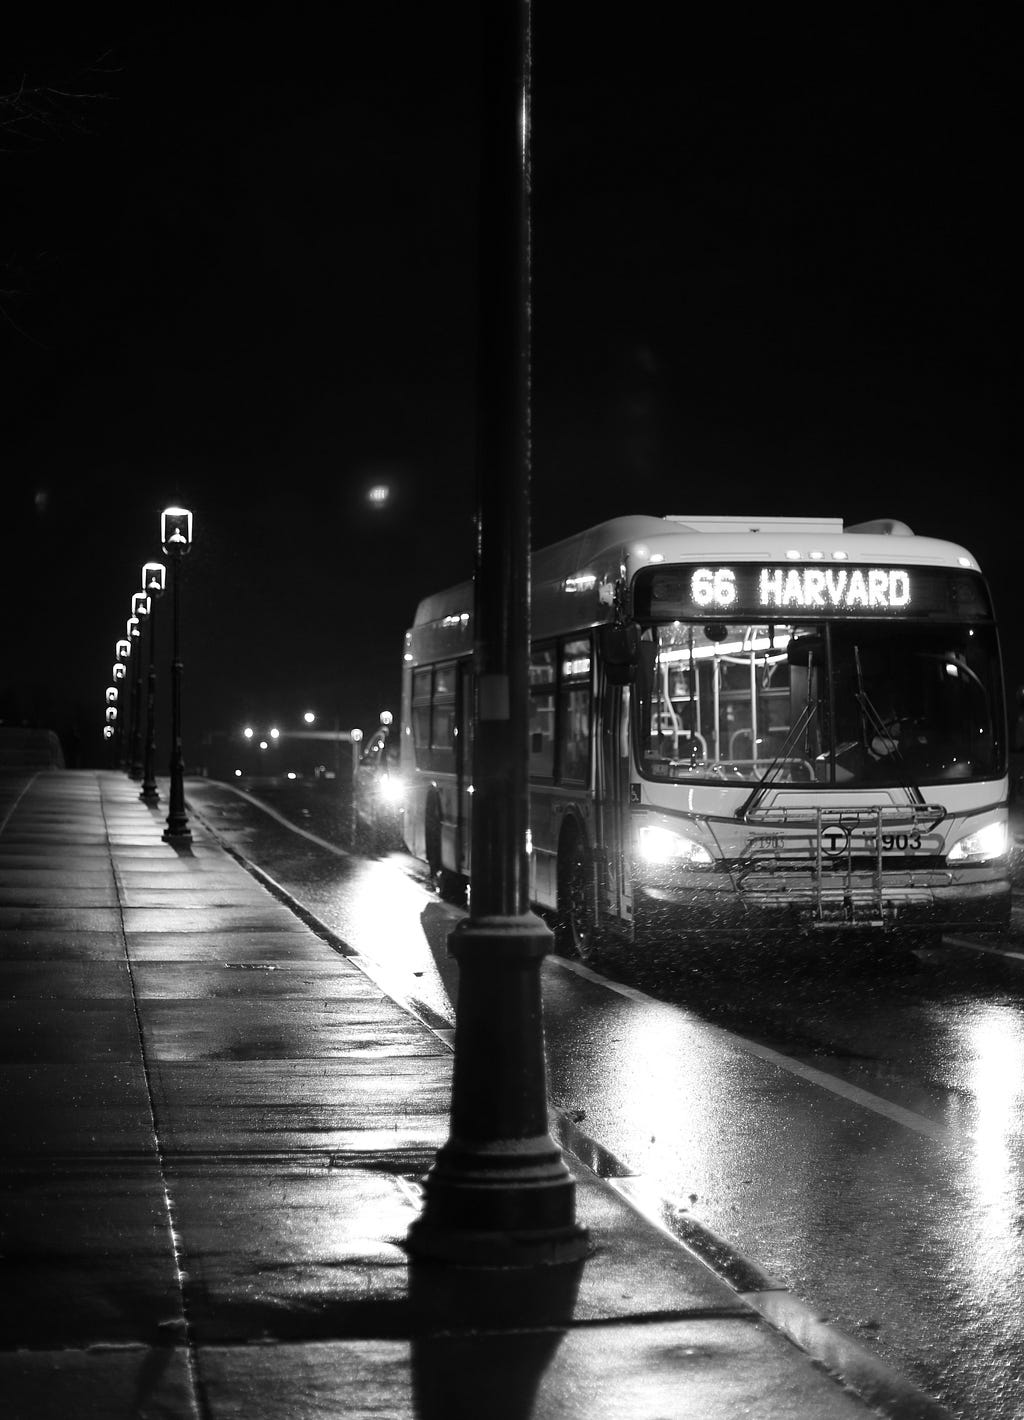 The Bus to Harvard (courtesy of Francis Malige)